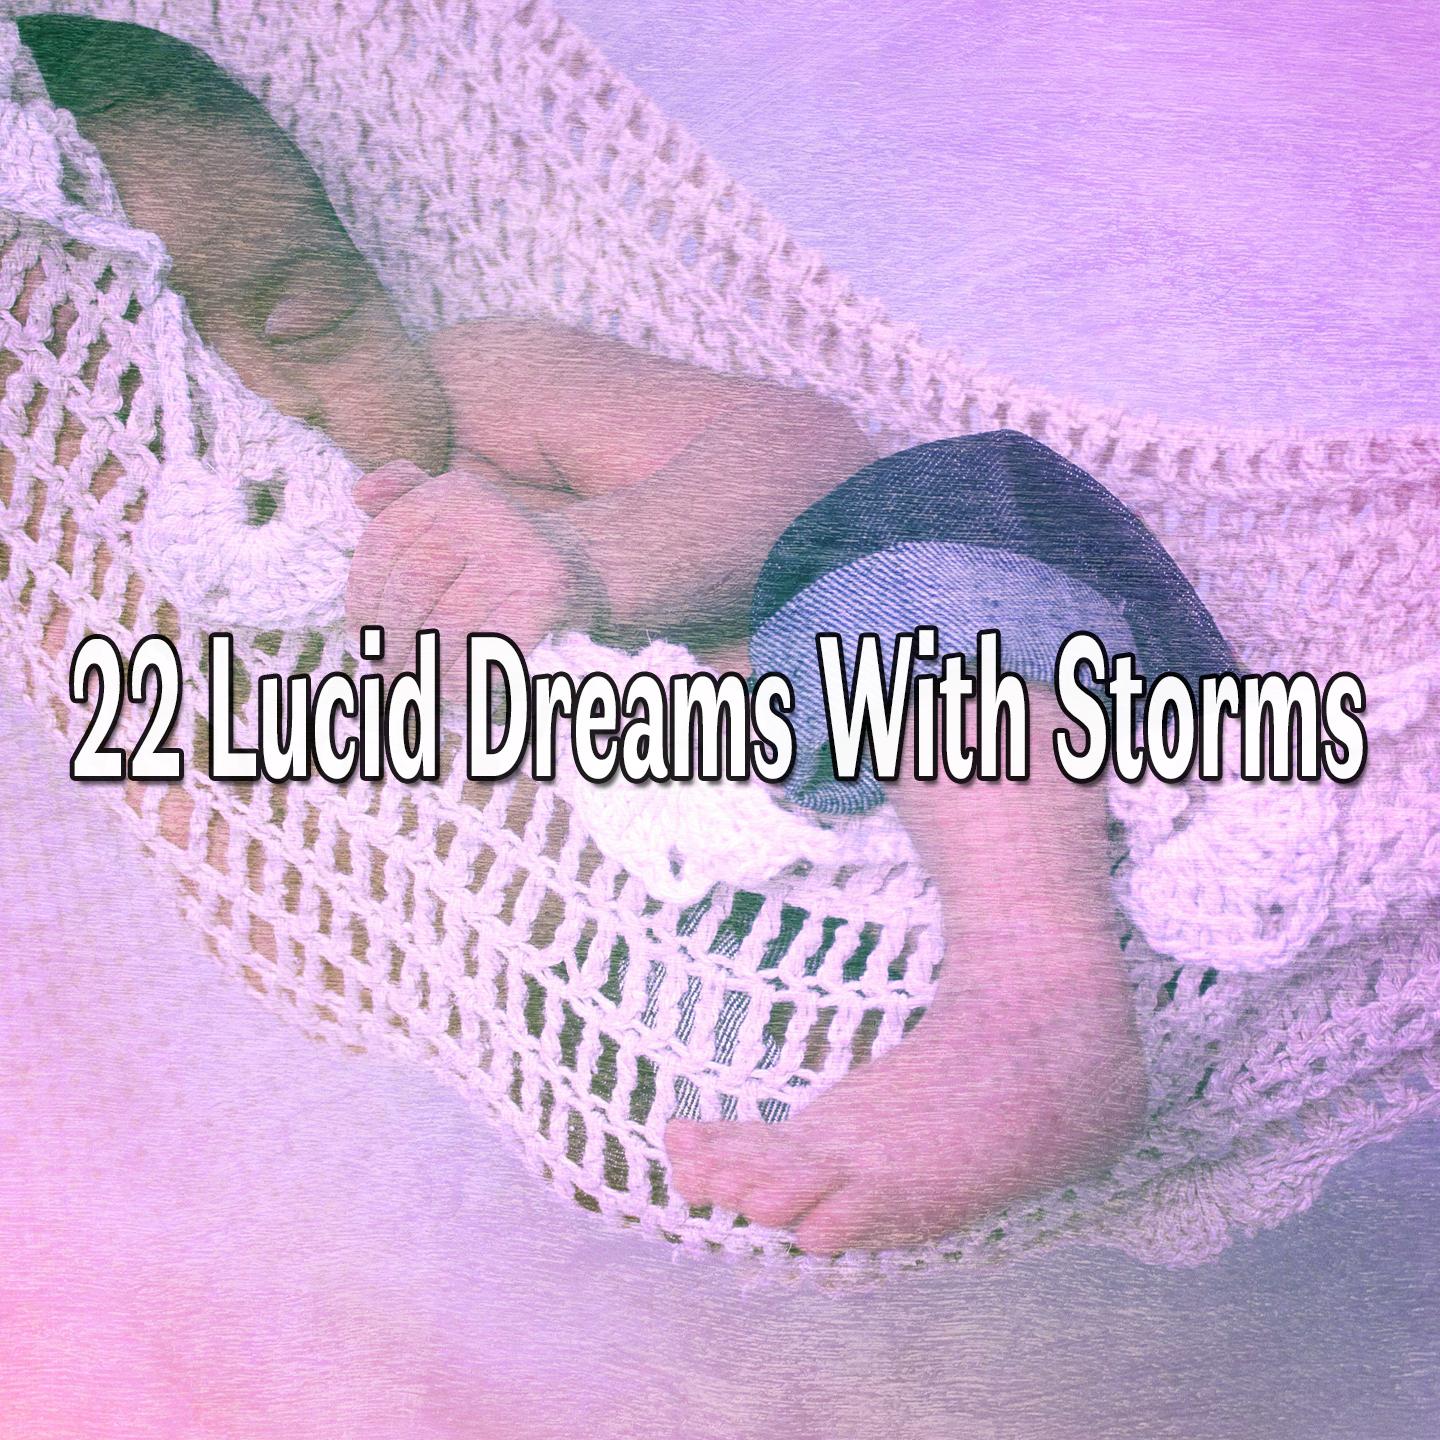 22 Lucid Dreams With Storms